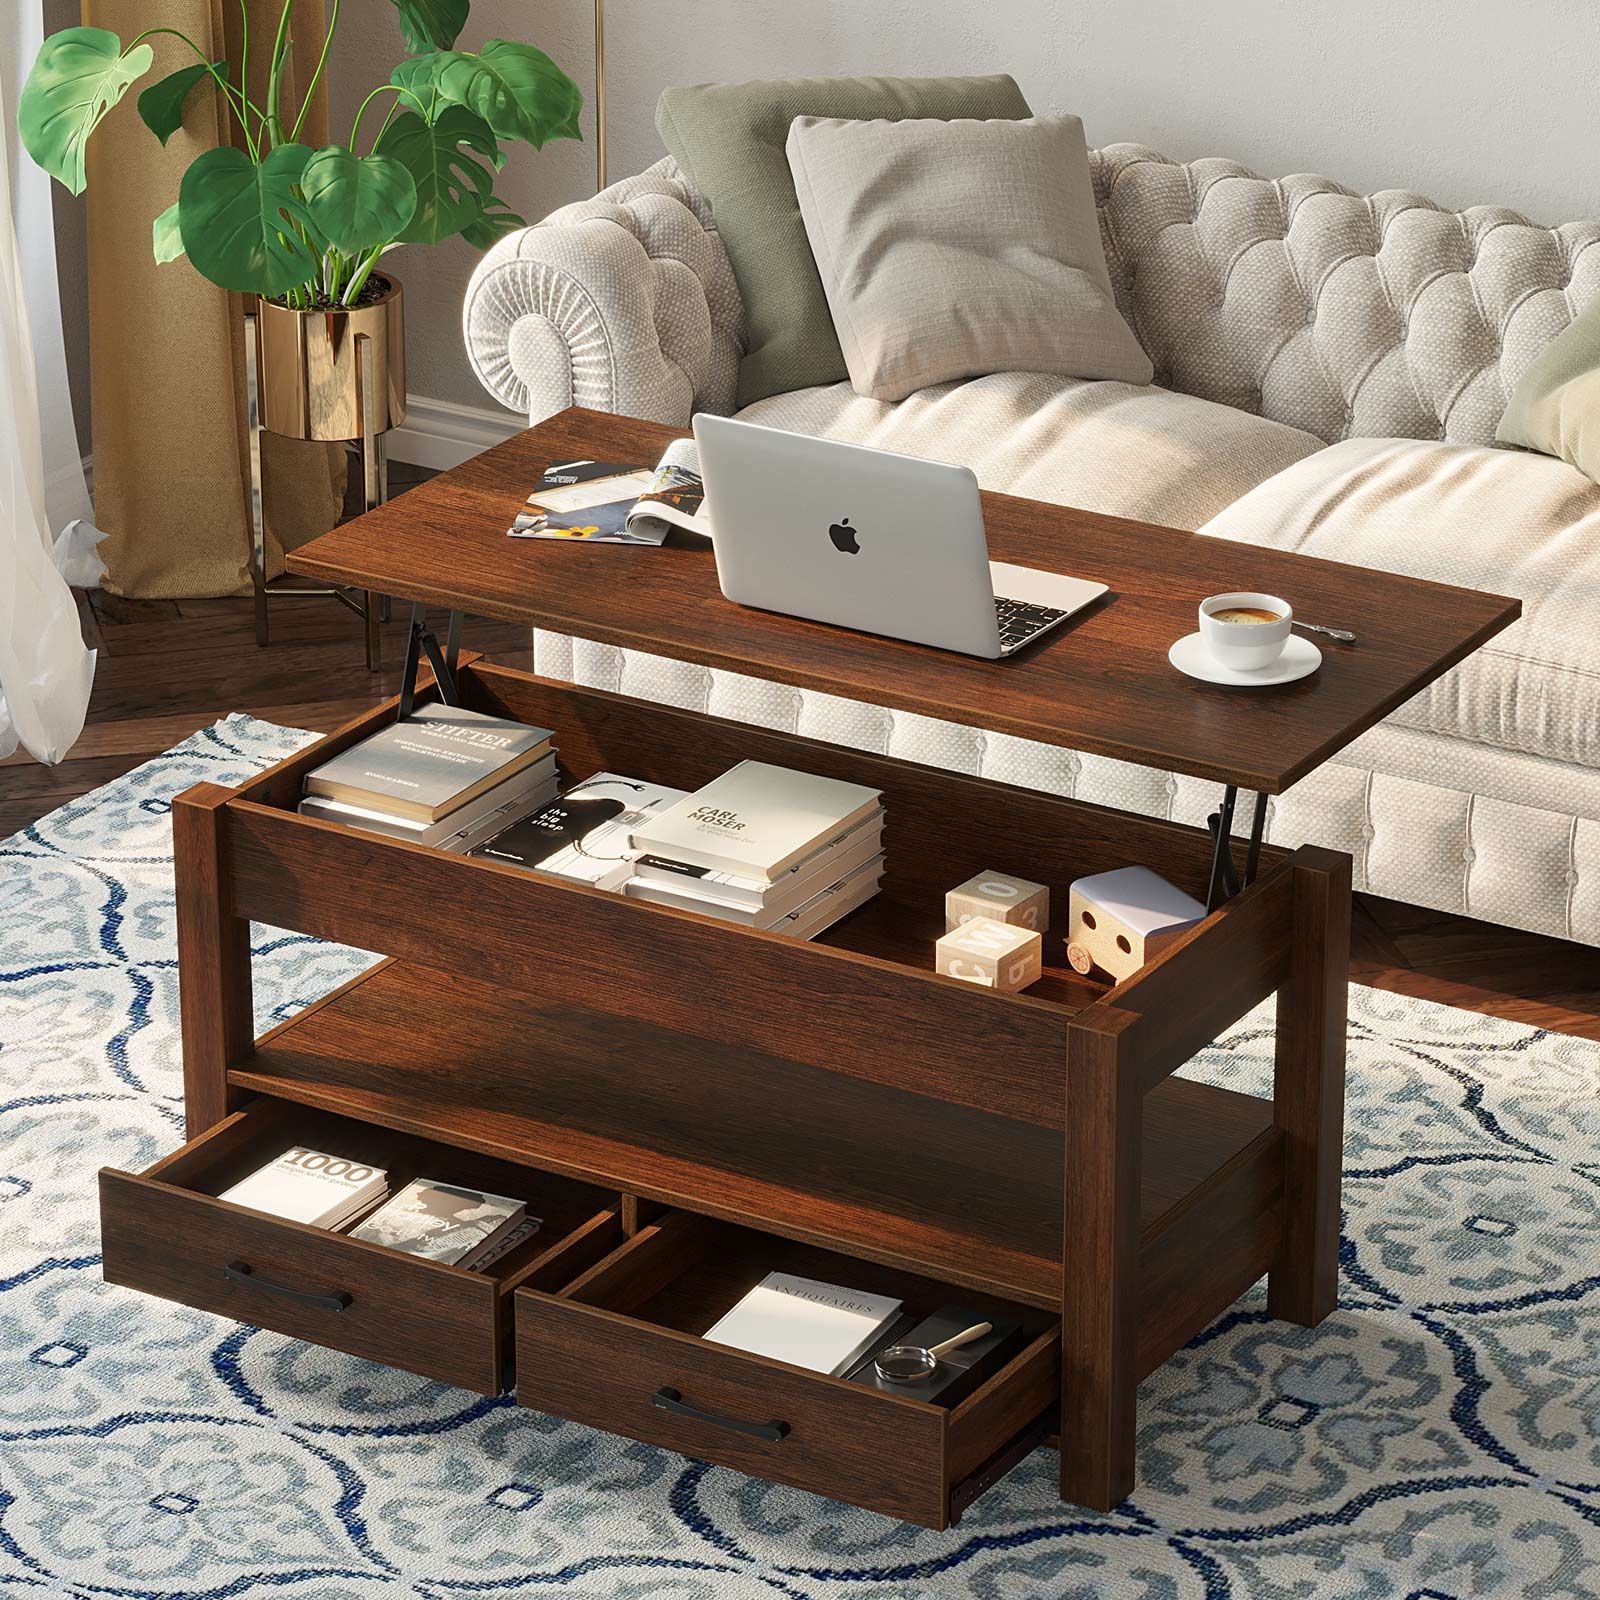 Rolanstar Coffee Table, Lift Top Coffee Table With Drawers And Hidden With Lift Top Coffee Tables With Storage Drawers (View 13 of 20)